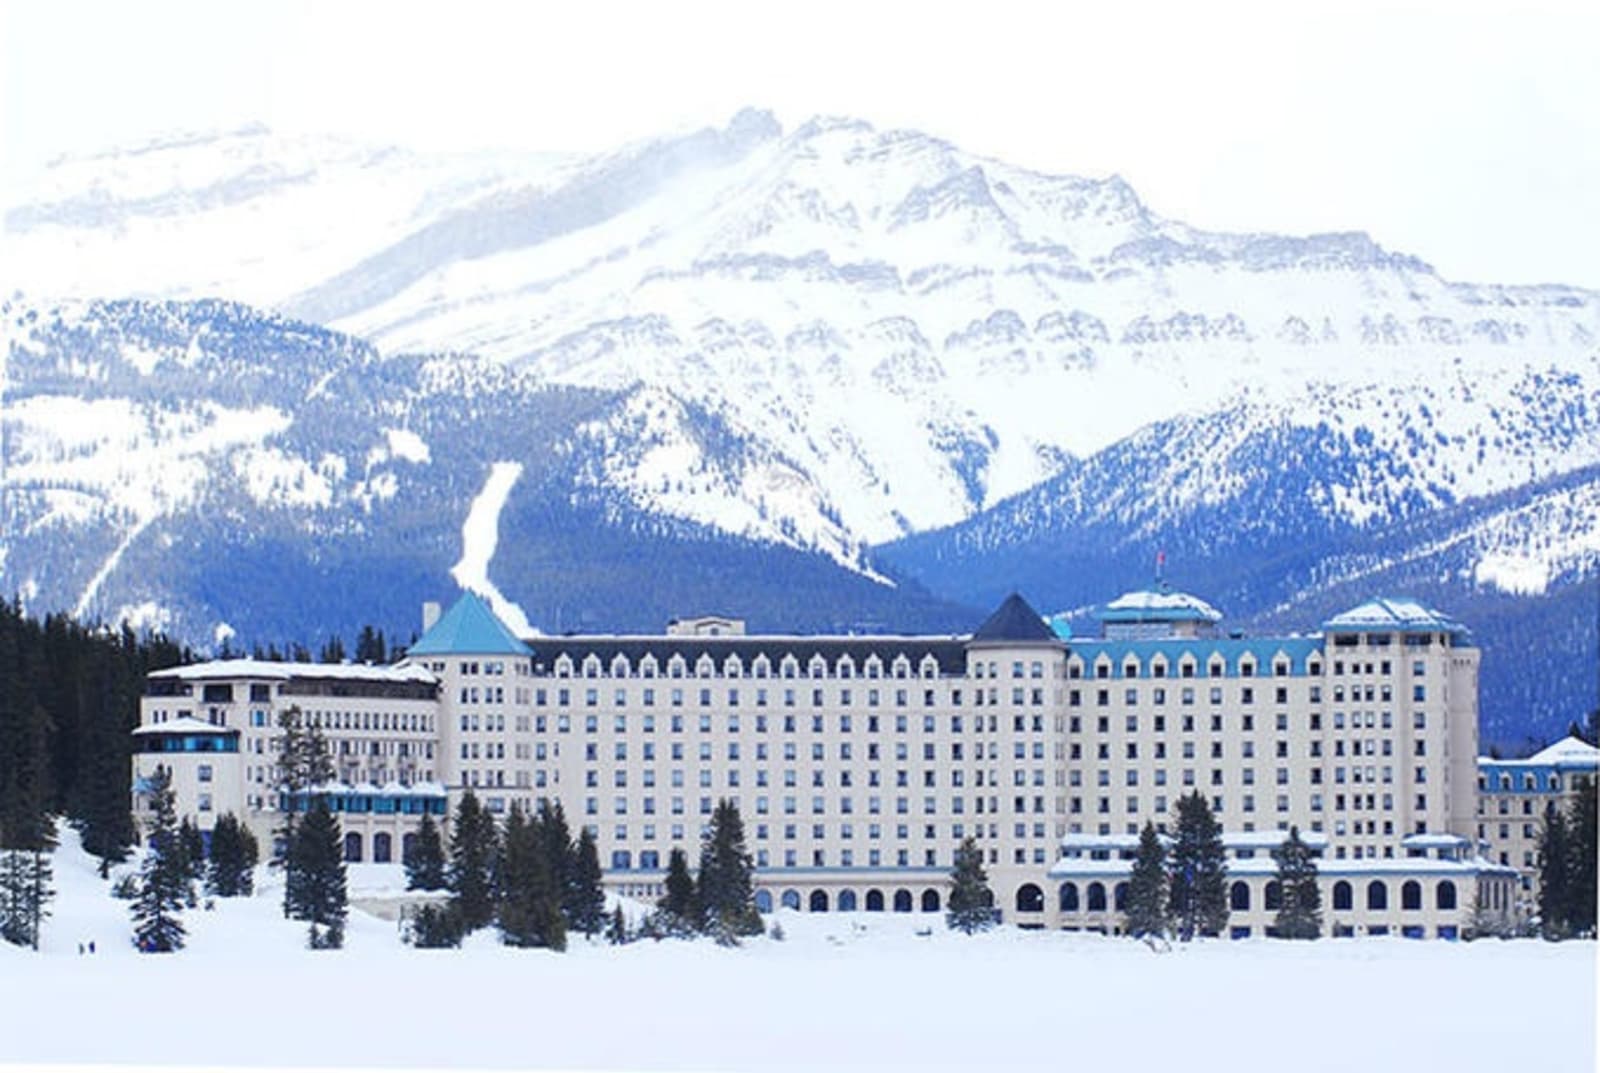 rs-chateau-lake-louise-snowy-canada-shutterstock_4509943.jpeg